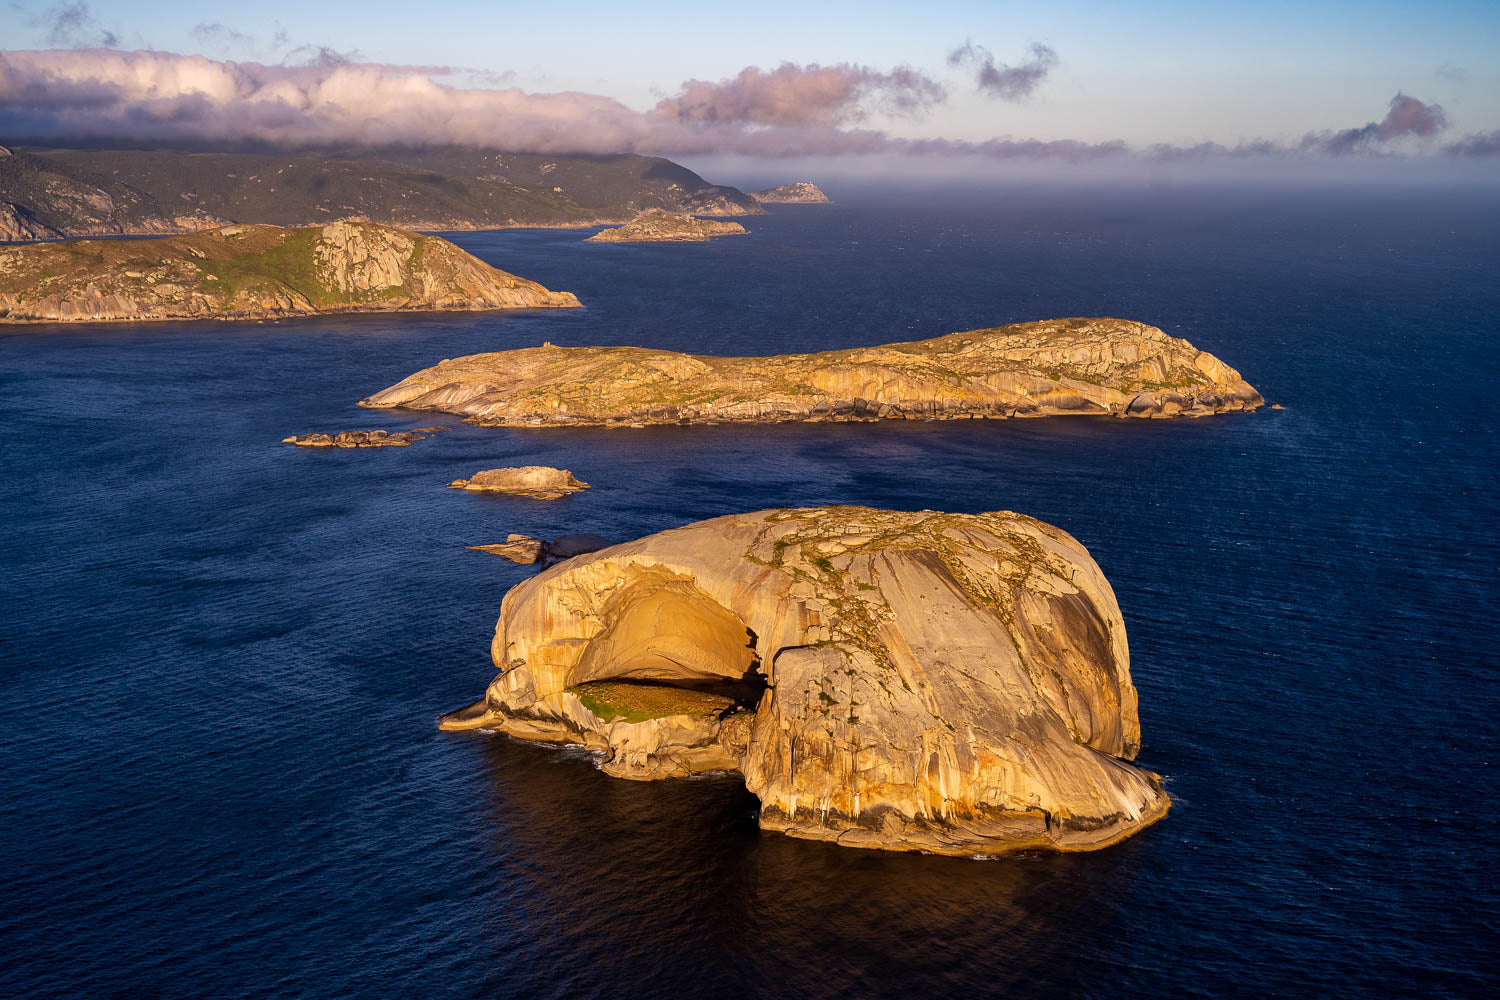 Scull Rock from above, Wilson's Promontory